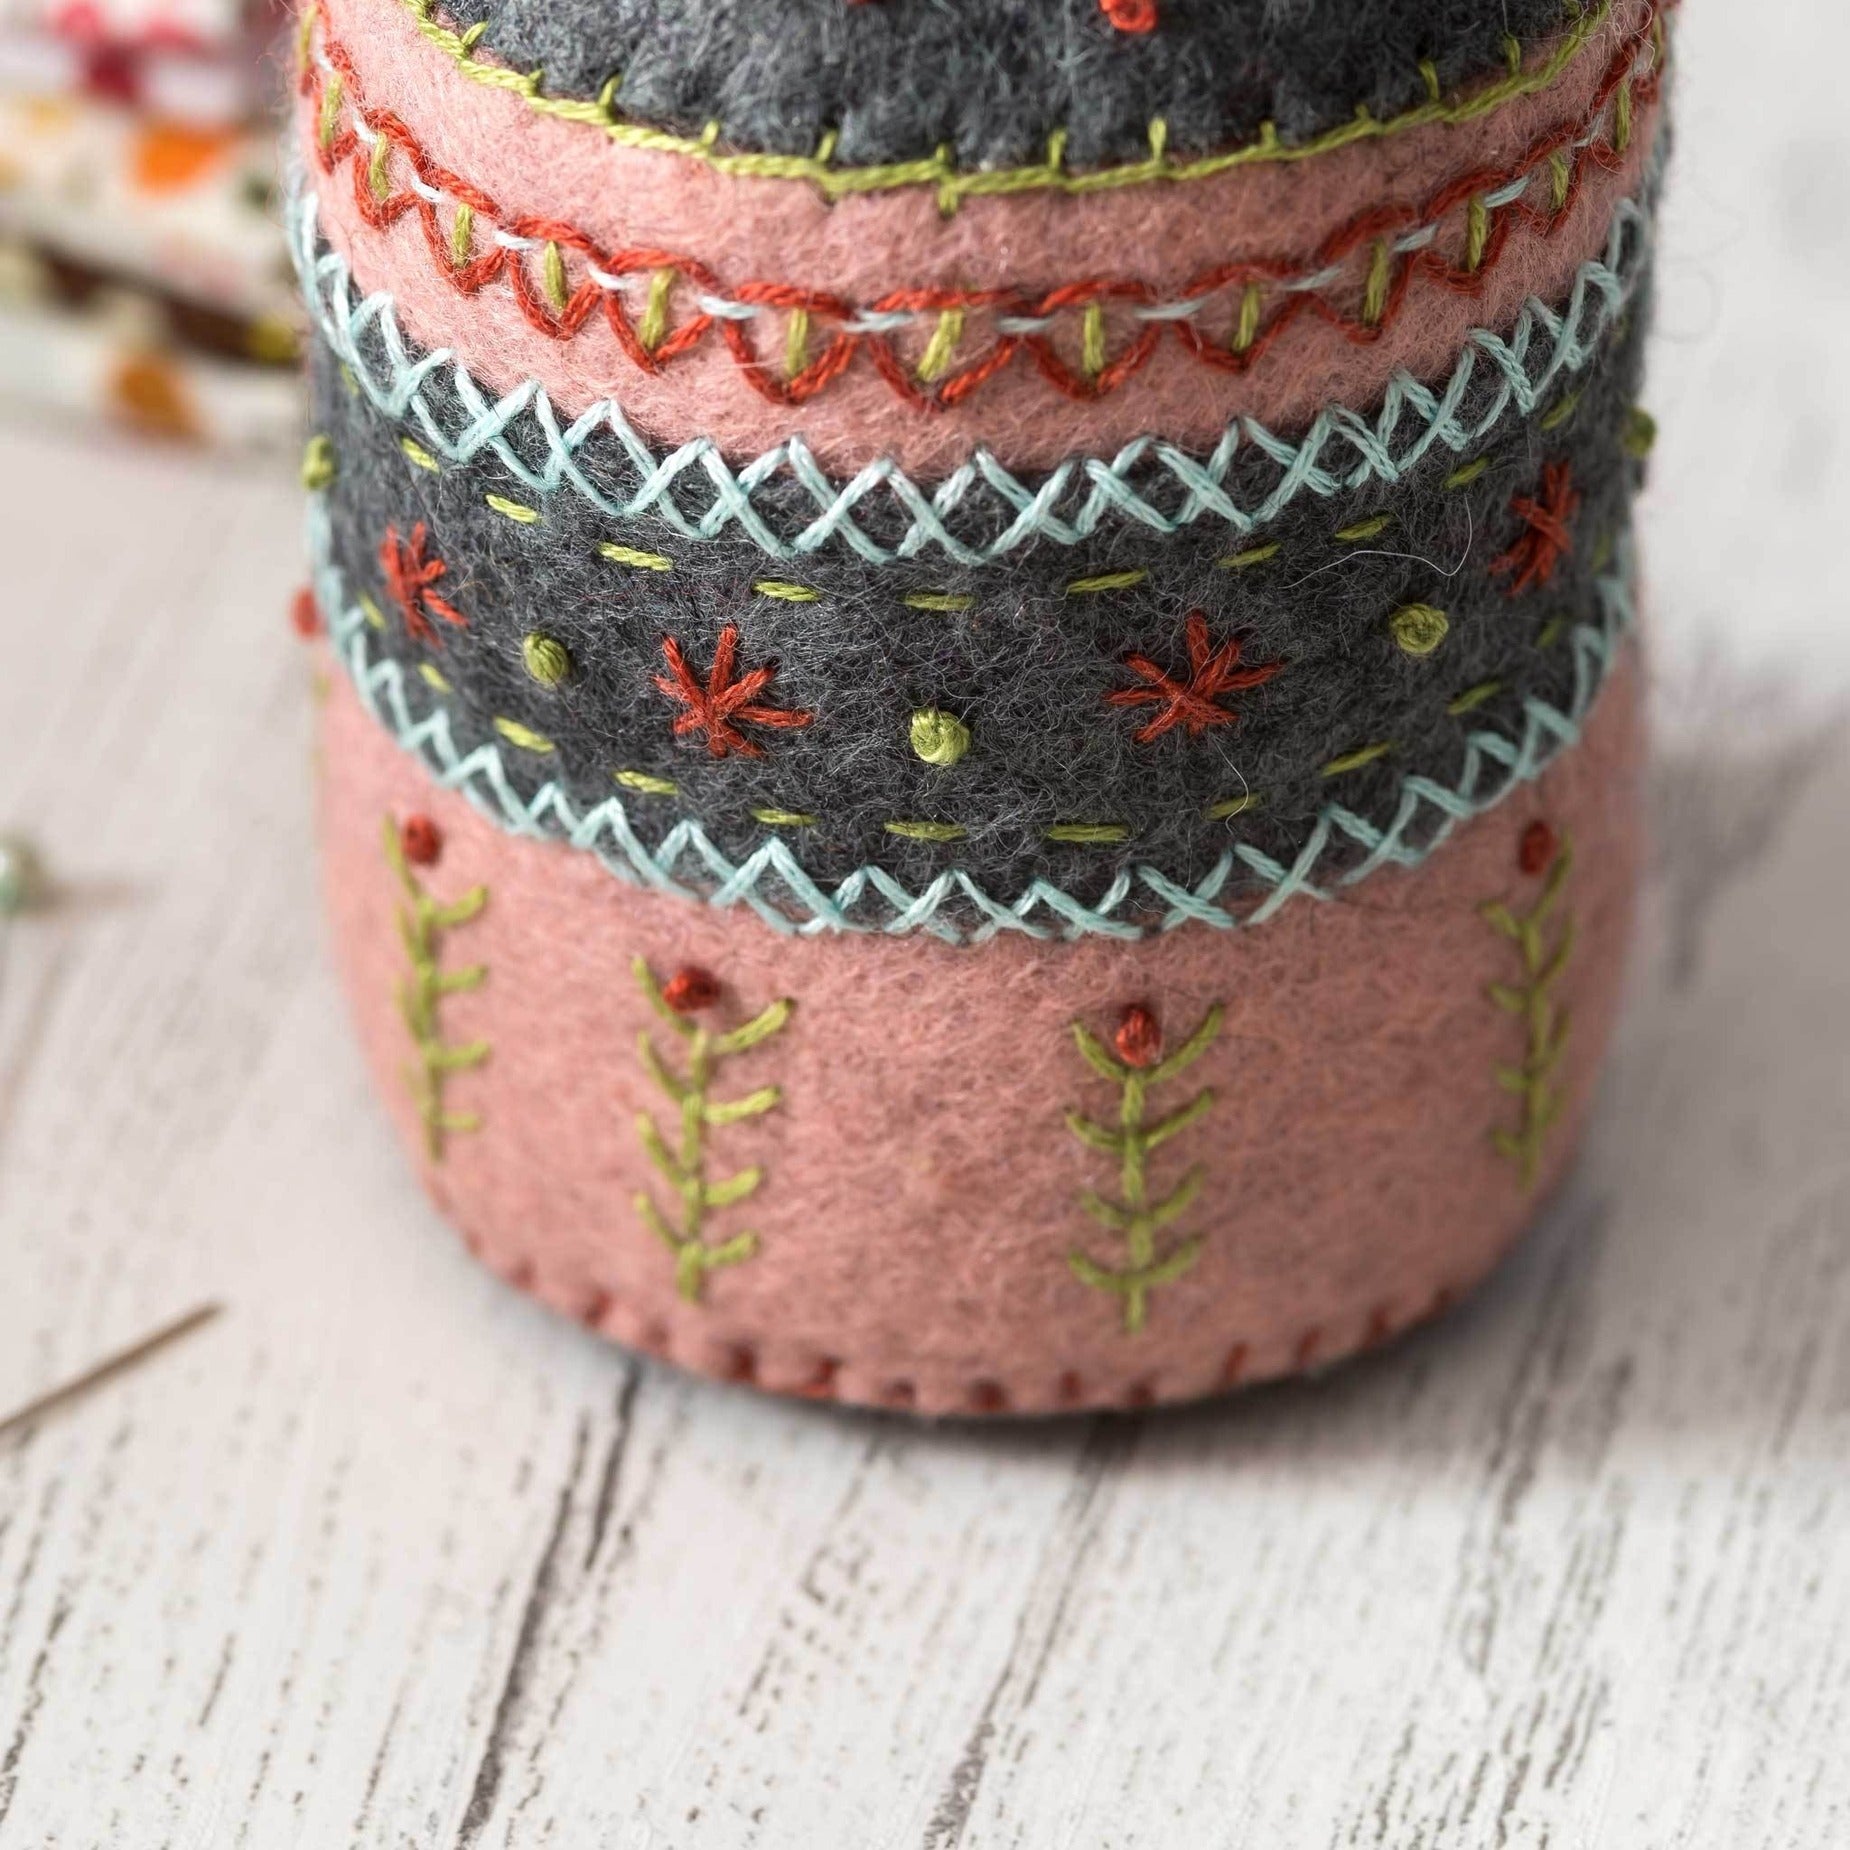 Close-up of hand-stitched felt pincushion layers featuring intricate embroidery patterns in teal, coral, and mustard against a rustic wooden backdrop.